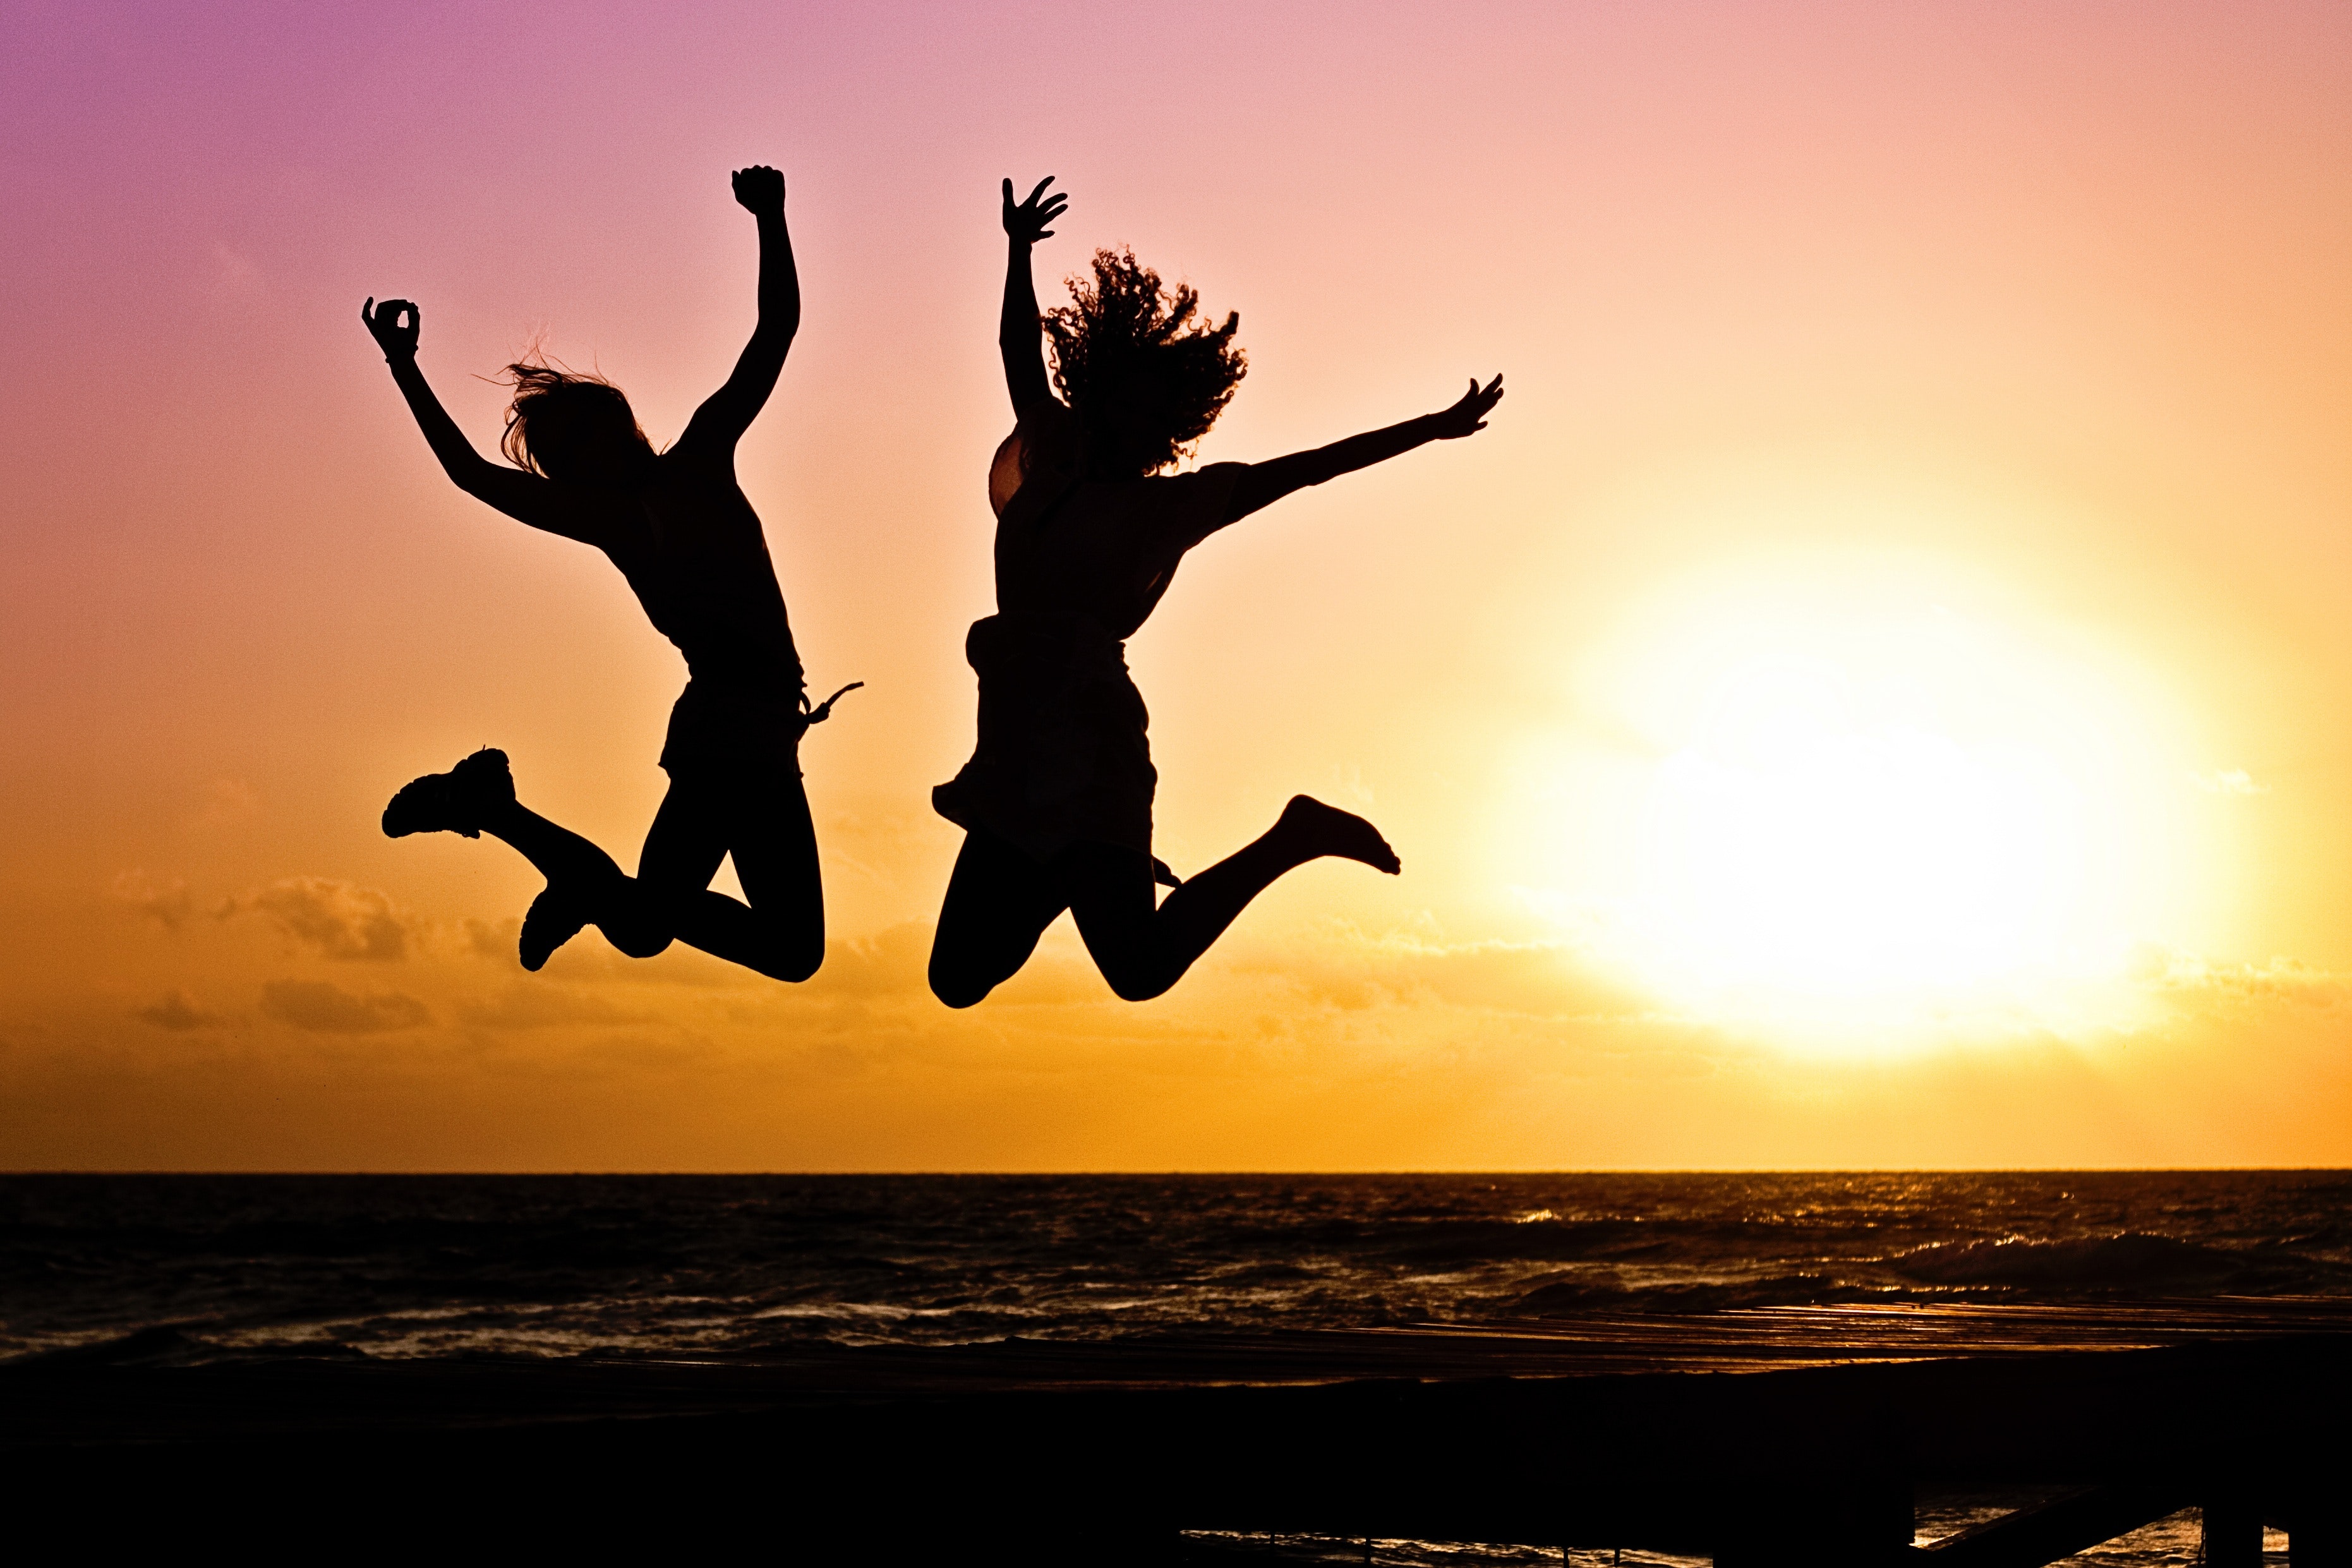 endorphins are generated in the body during exercise - happy people jumping at a beach